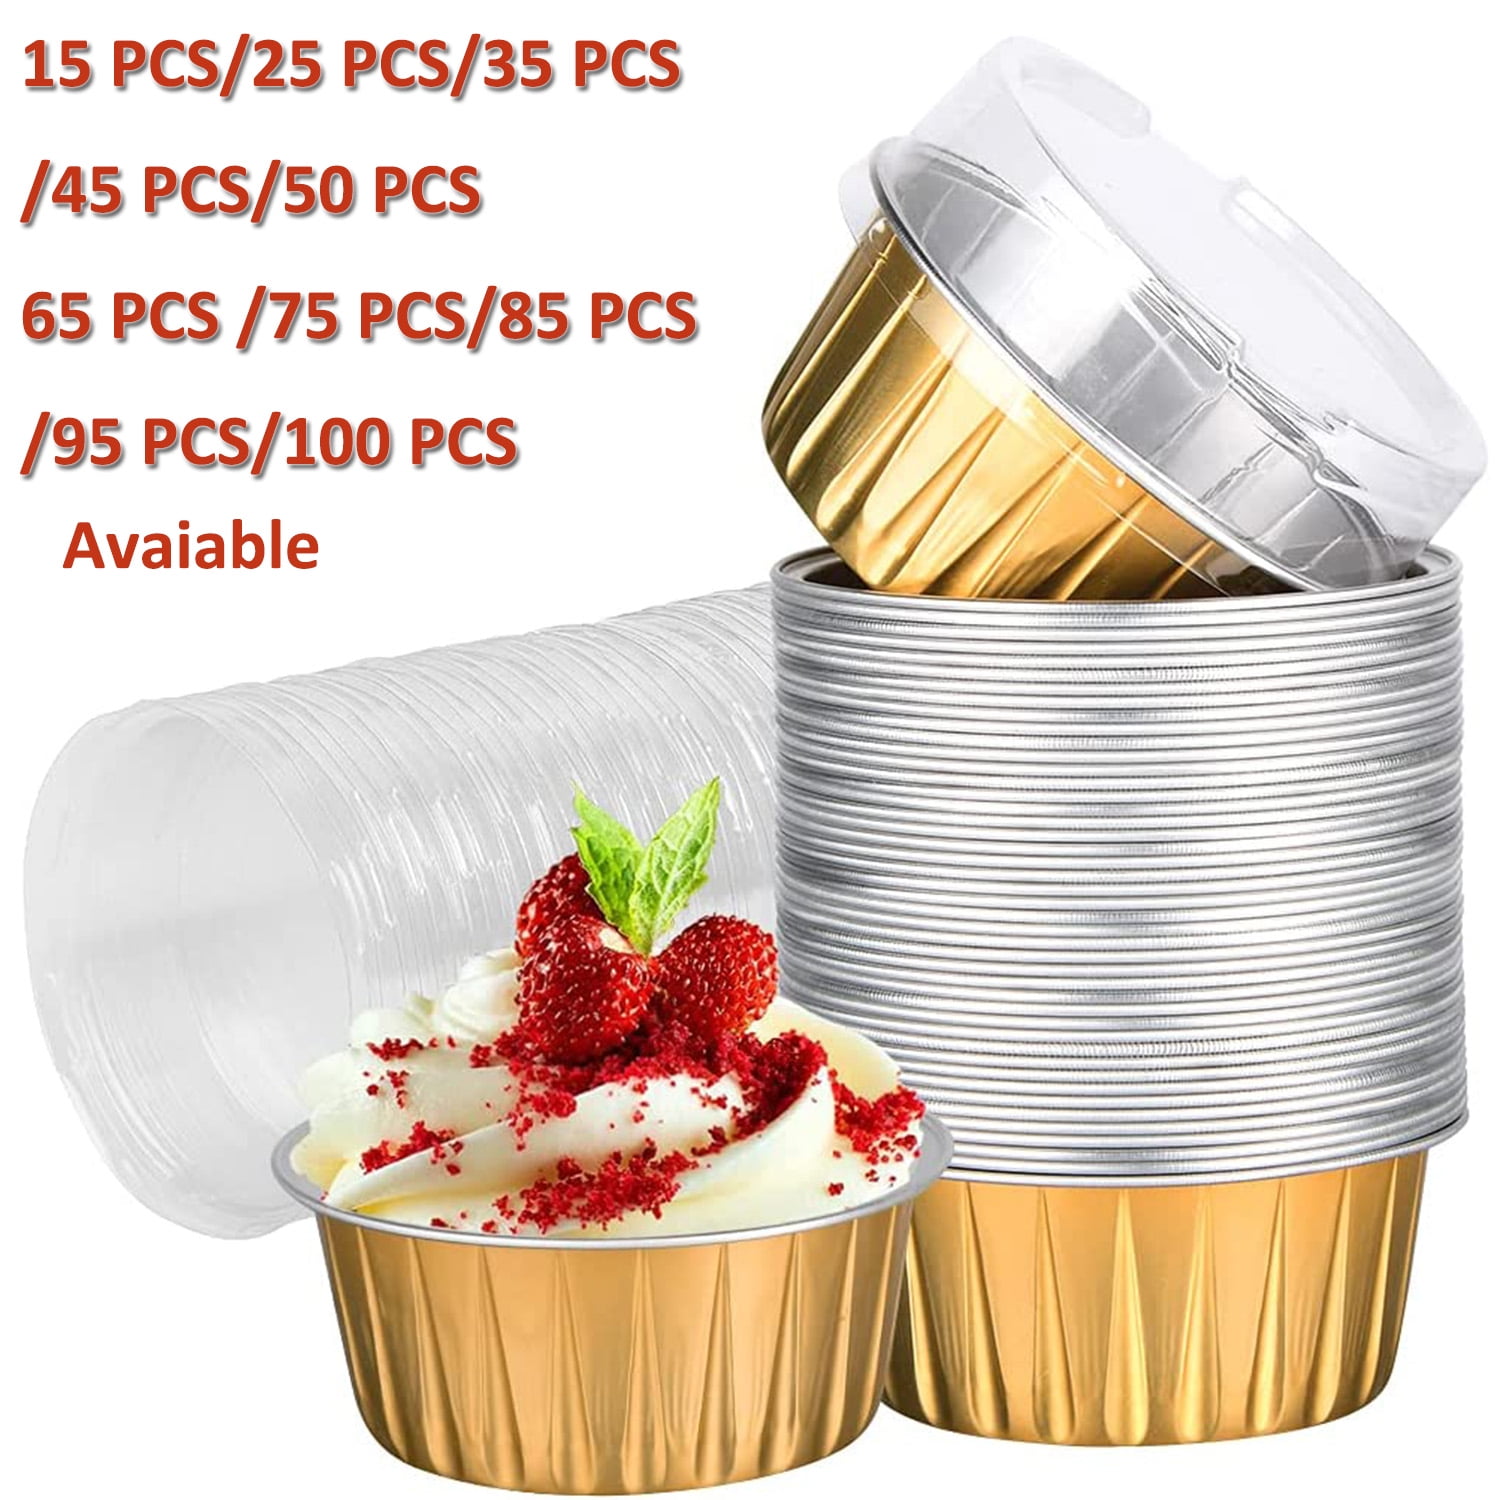 Premium 5-oz Baking Cups with Lids - Round Foil Baking Cups & Lids Perfect for Fancy Desserts, Appetizers, or Mini Snacks - Coffee Brown Cup with